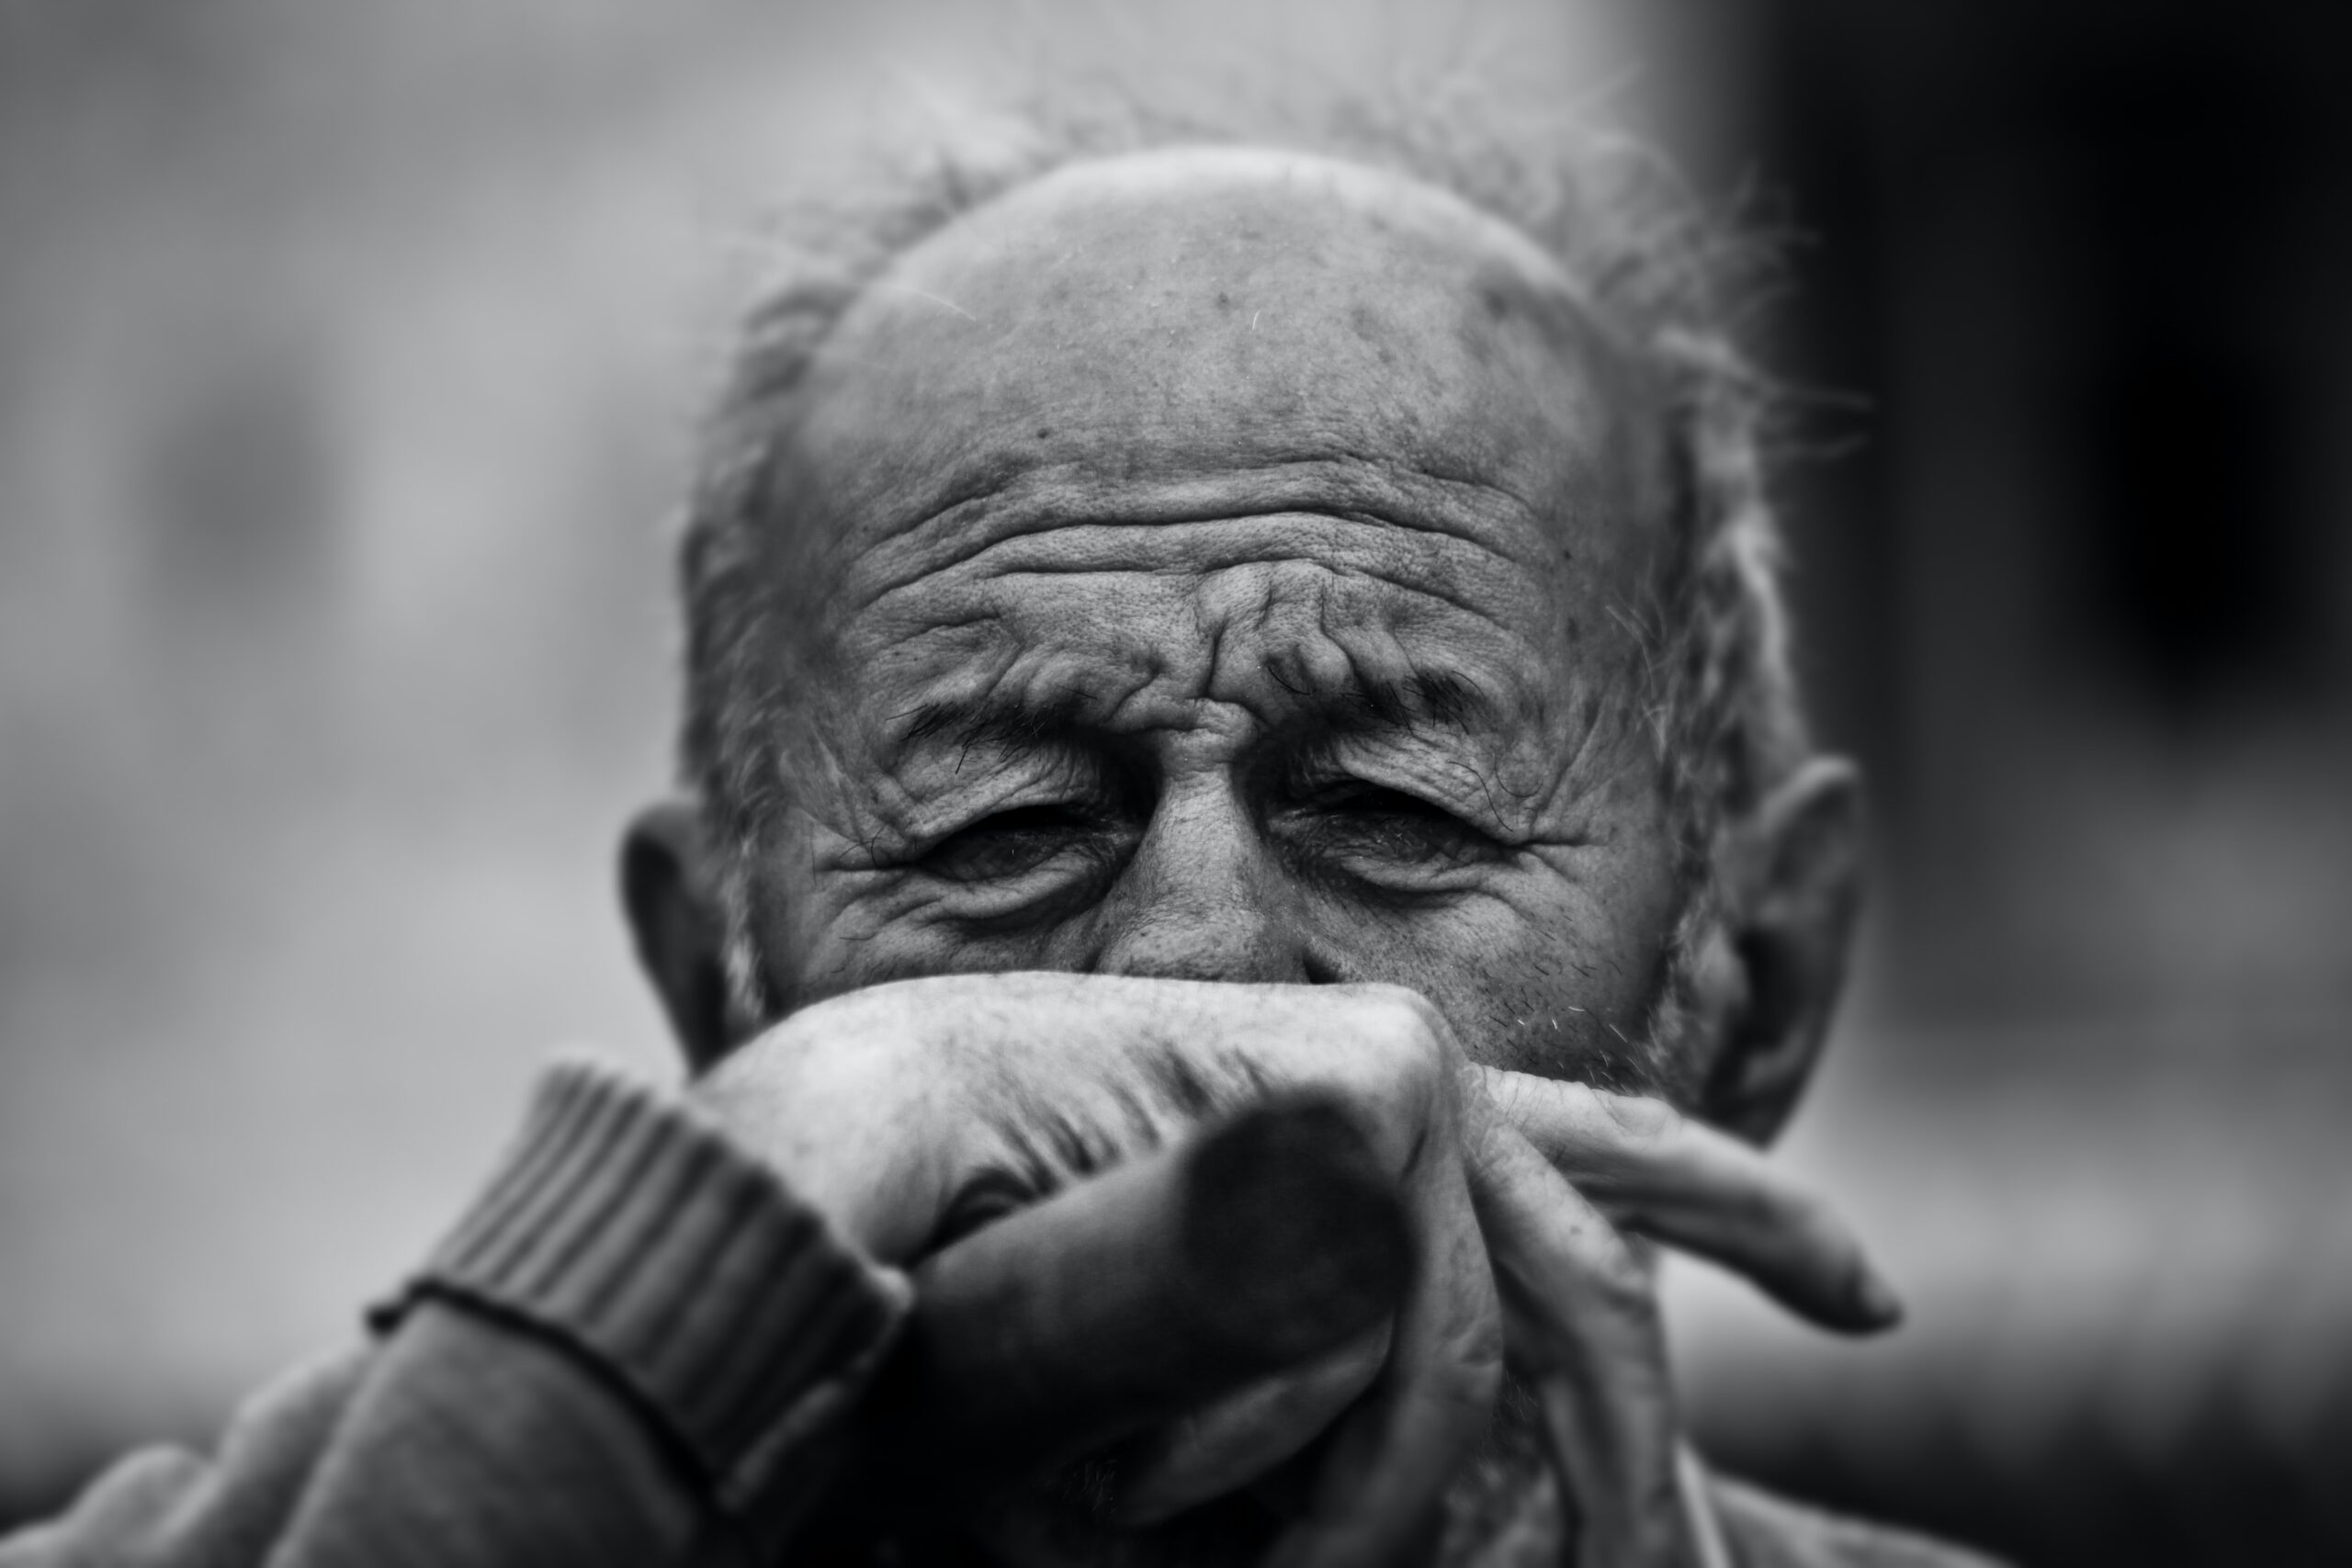 Sad elderly man, representing memory impairment seen in Alzheimer's disease and conditions like PTSD.